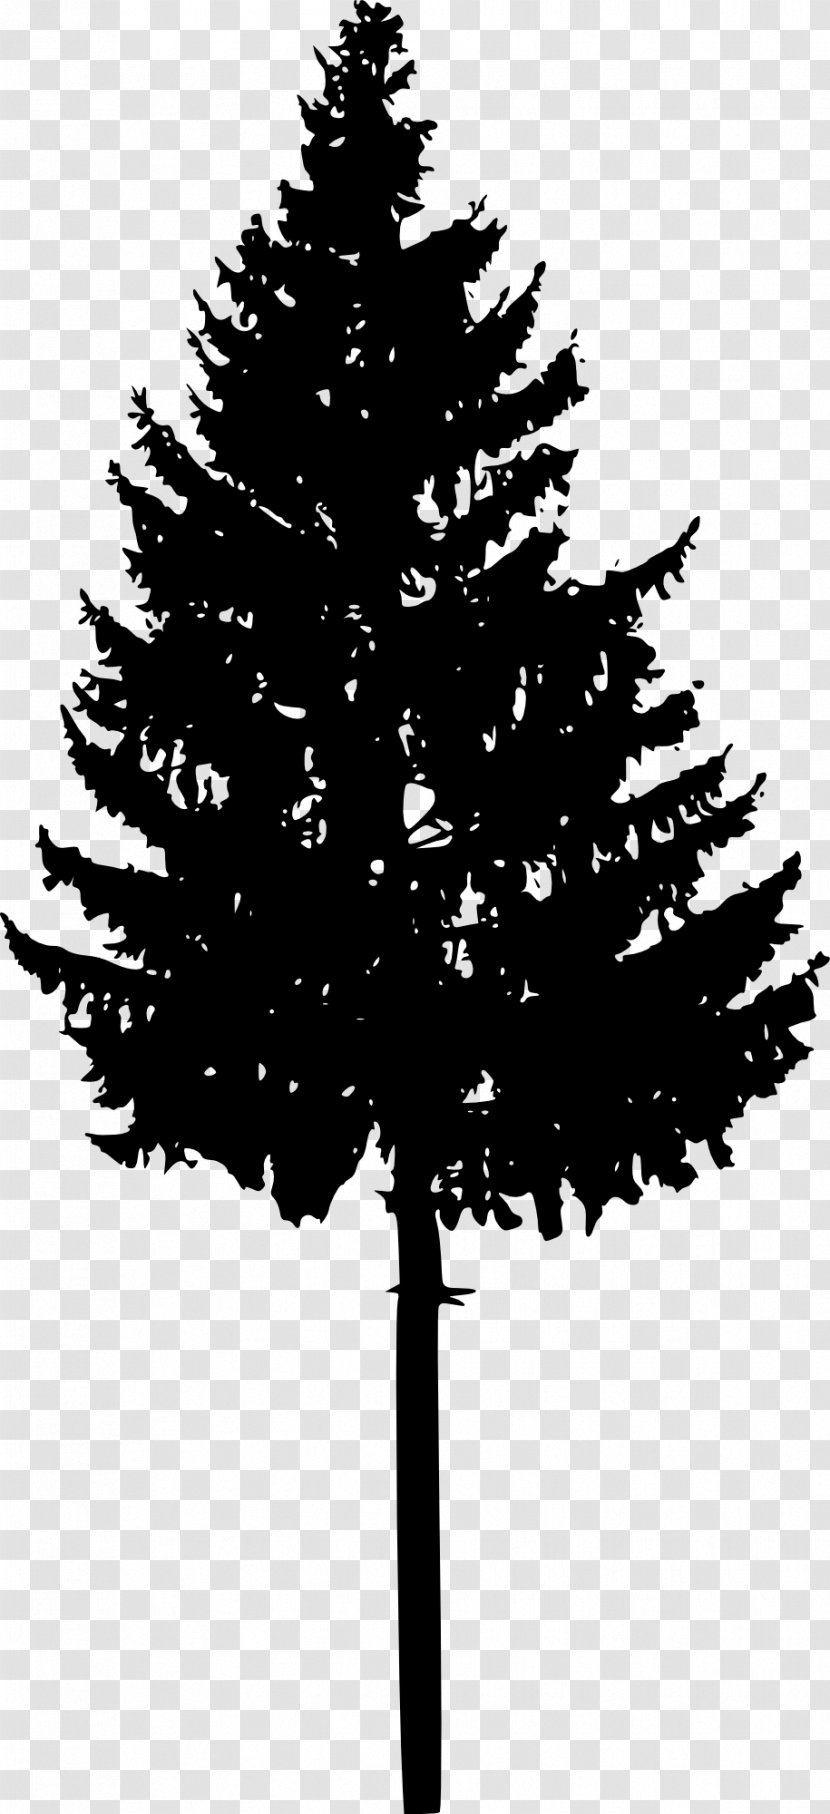 Tree Spruce Fir Conifers Silhouette - Silhouettes Transparent PNG